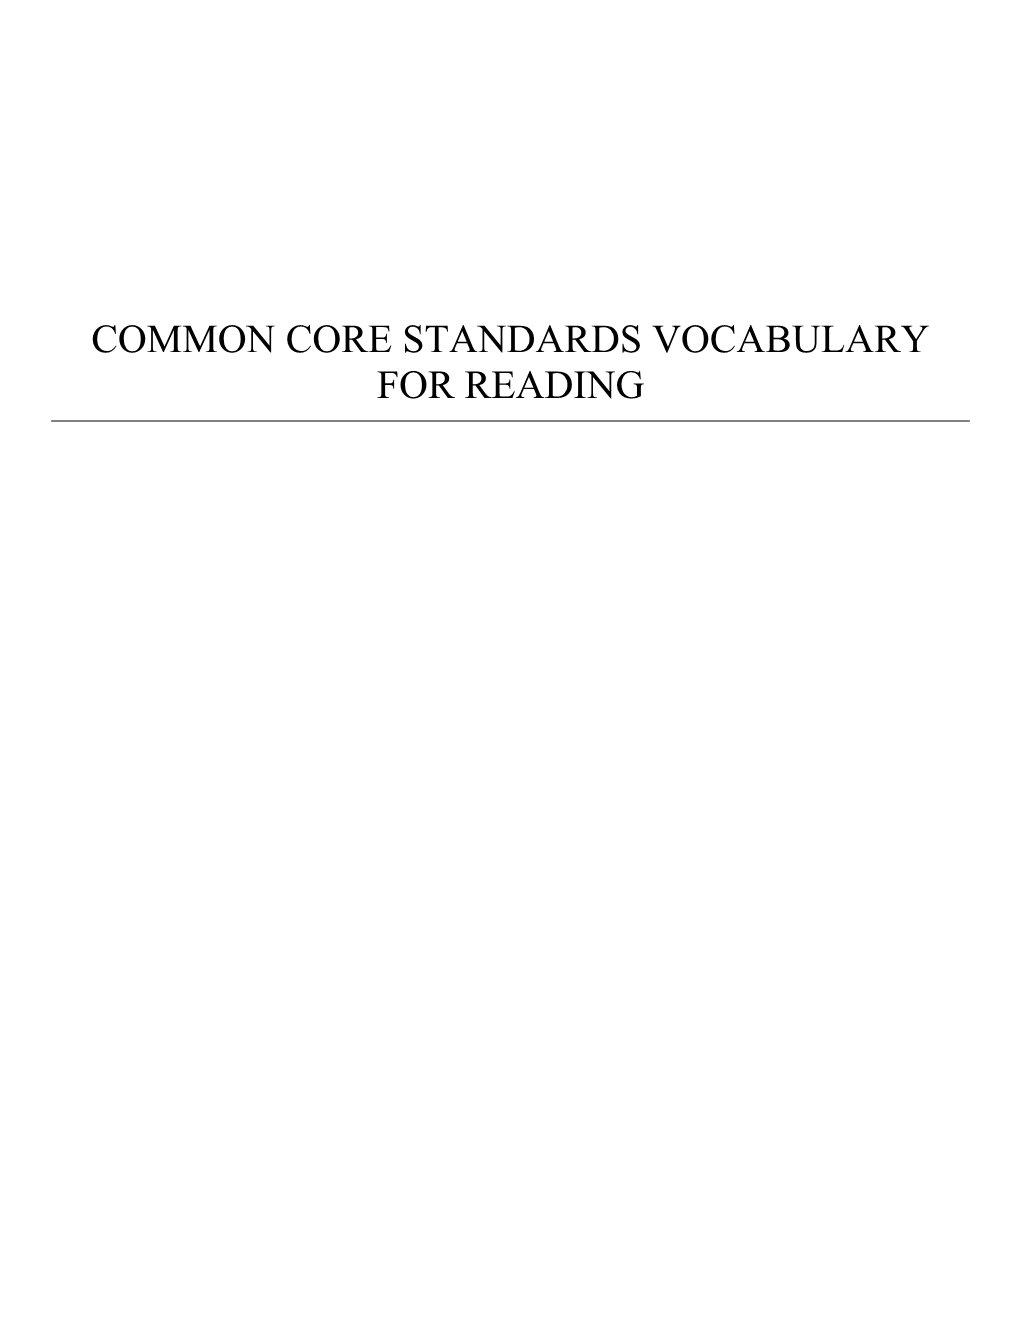 Common Core Standards Vocabulary for Reading